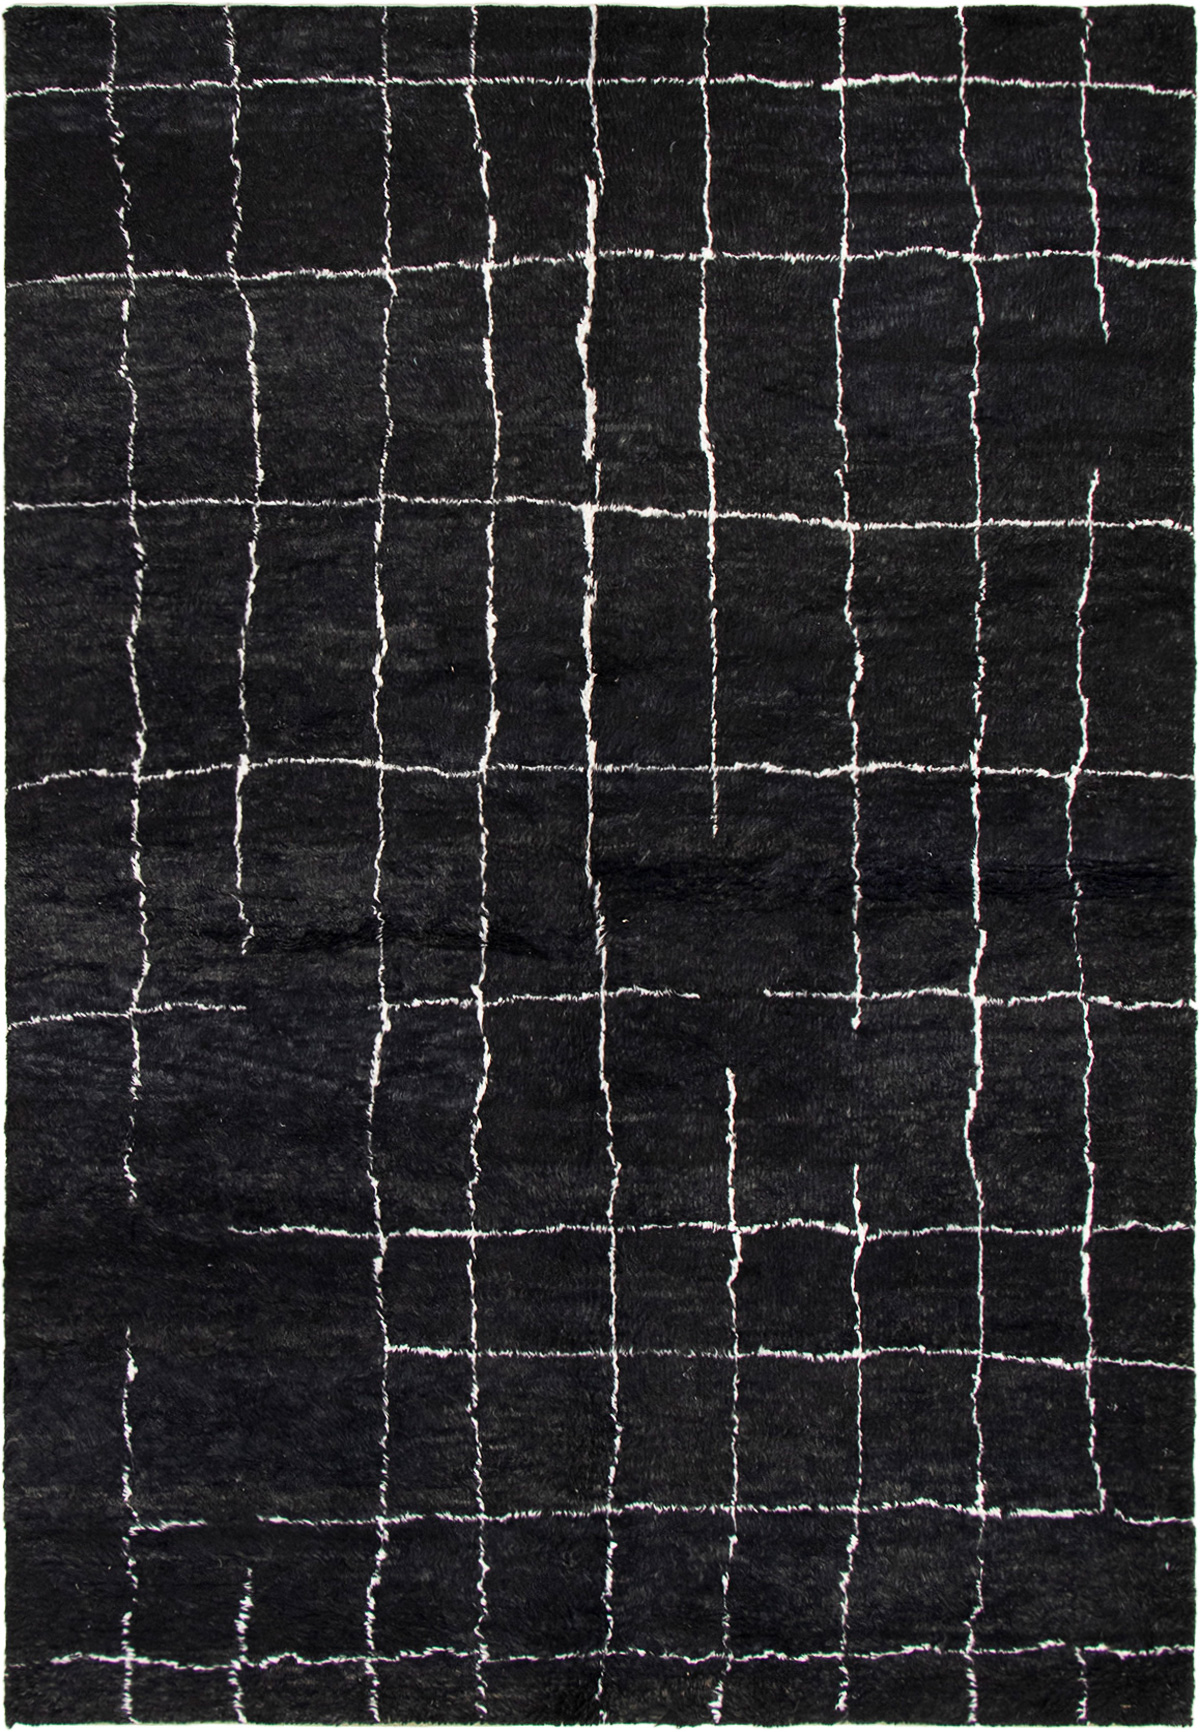 Hand-knotted Arlequin Black Wool Rug 6'0" x 9'0"  Size: 6'0" x 9'0"  